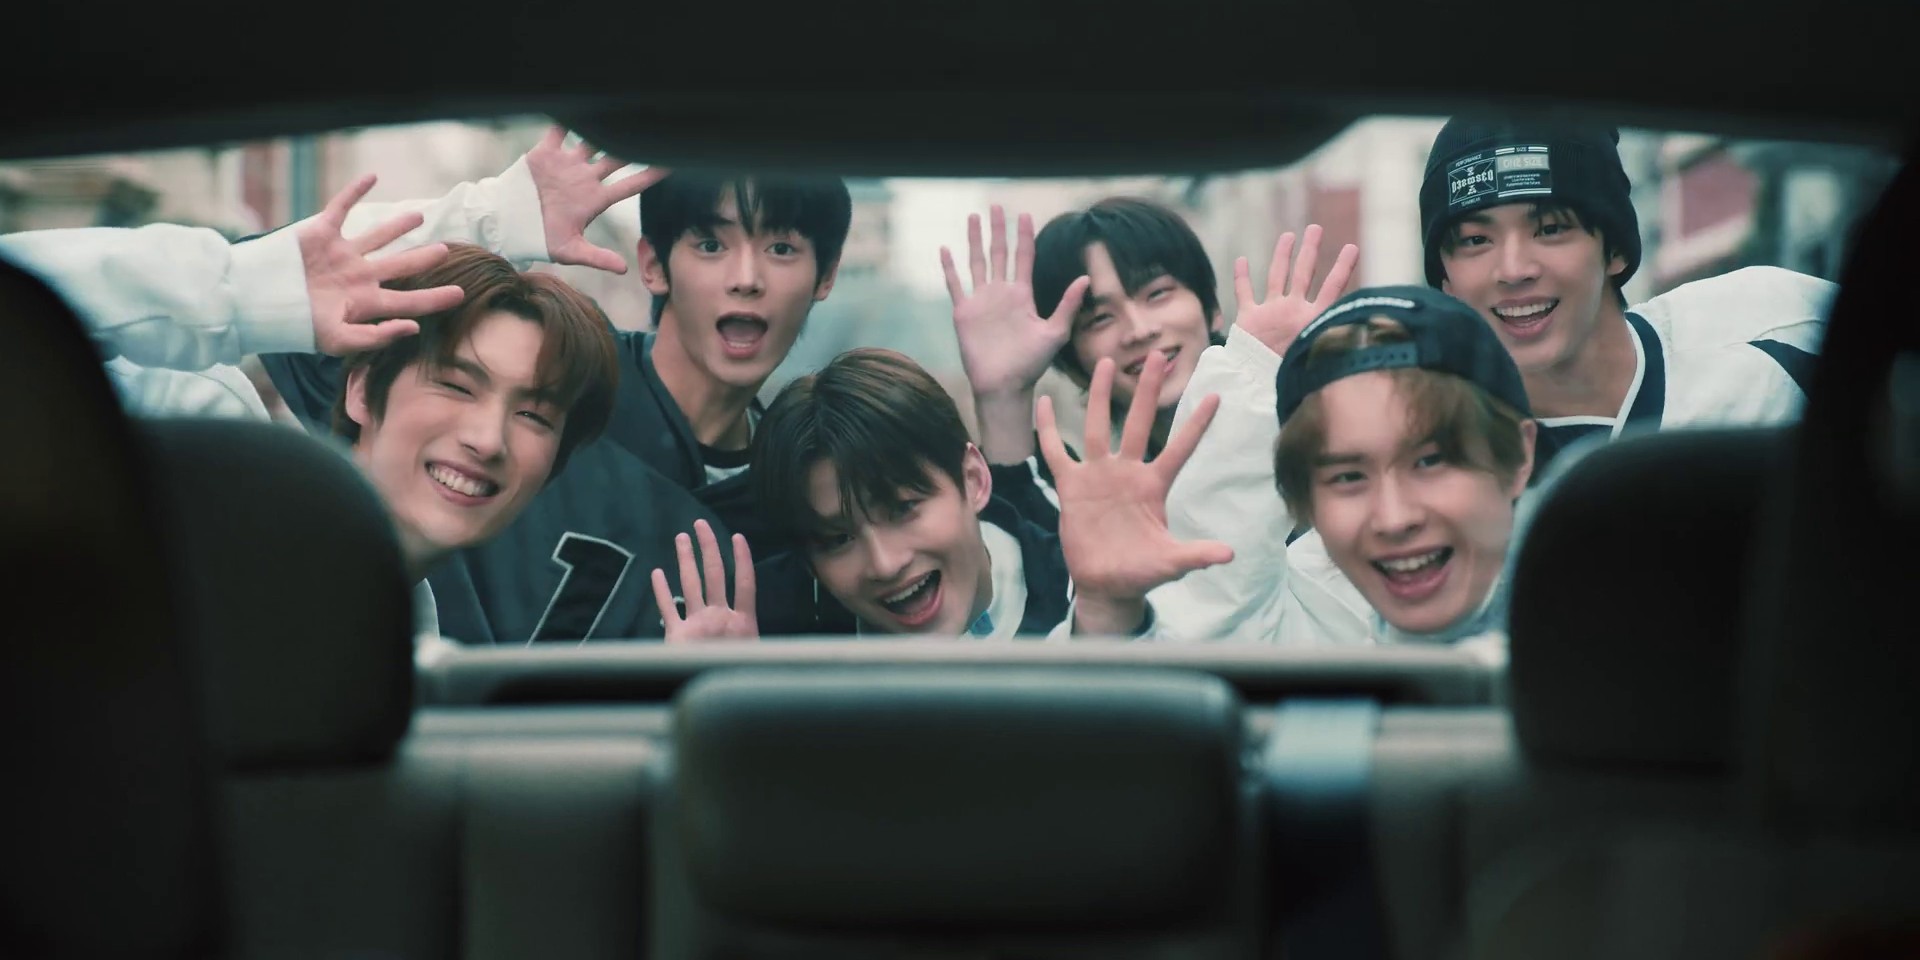 Meet TWS: PLEDIS’s new boy group says hello to the world with pre-release single ‘Oh Mymy : 7s’ – watch
